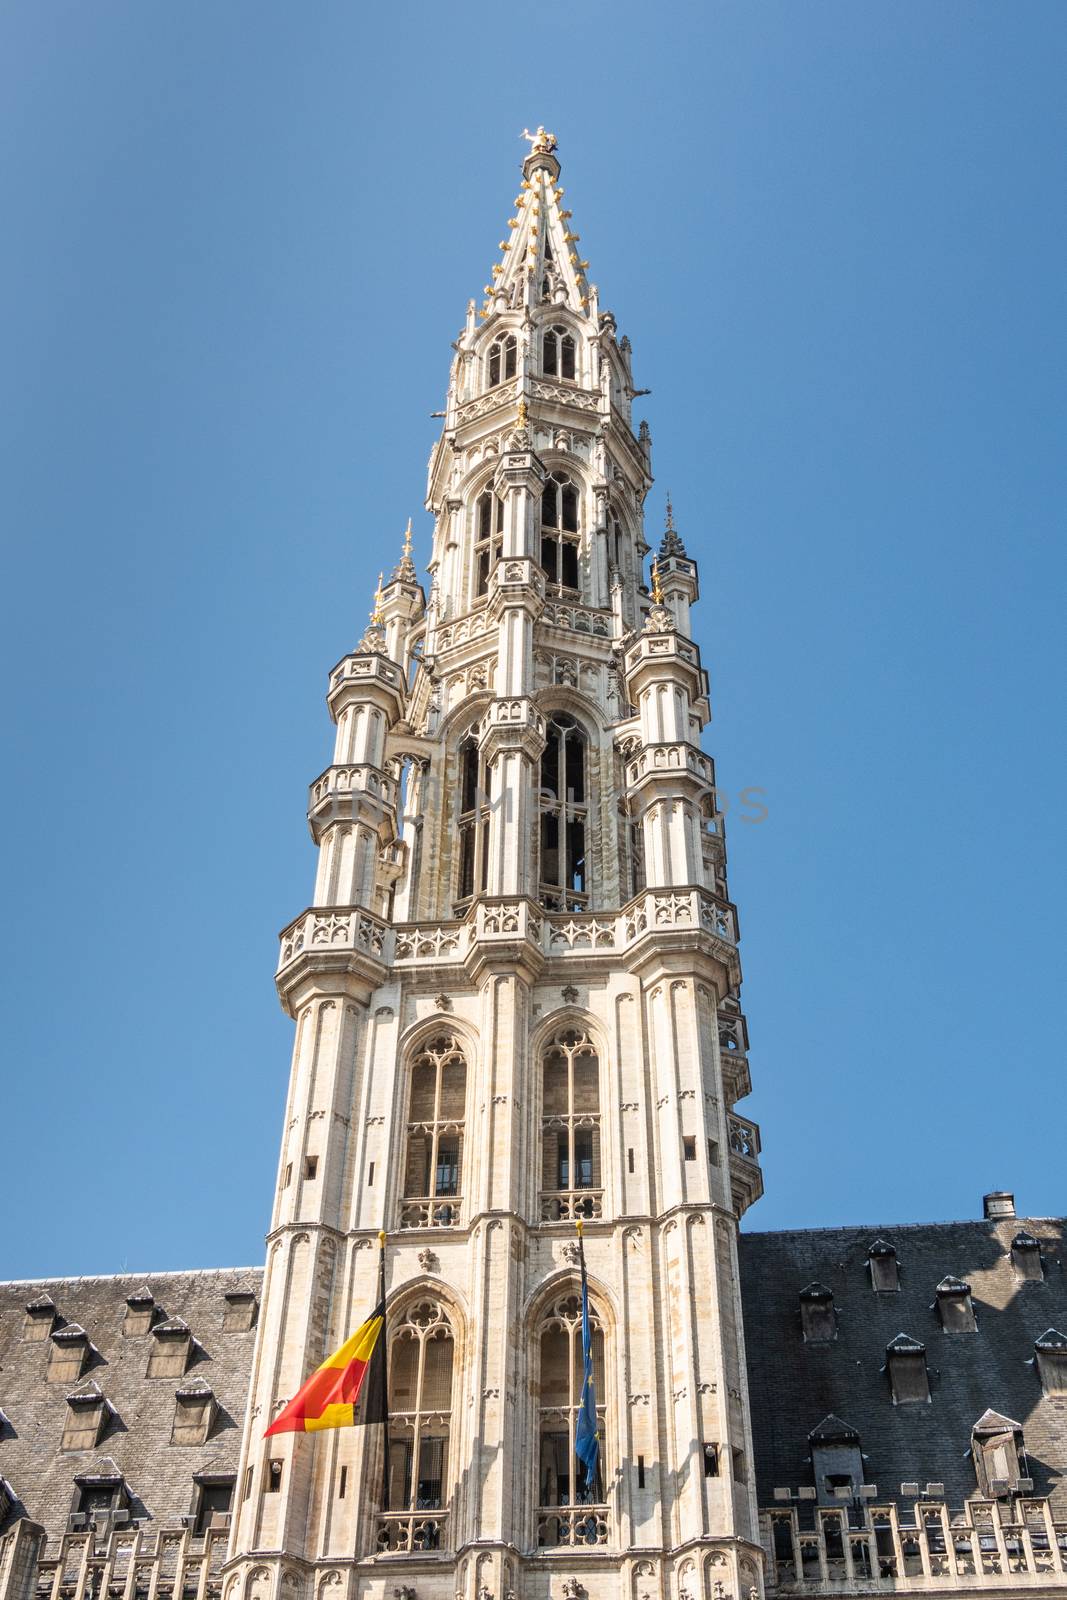 Brussels, Belgium - June 22, 2019: Closeup of gray stone spire of city hall with Belgian flag on Grand Place against blue sky. Golden Saint Michael statue on top.